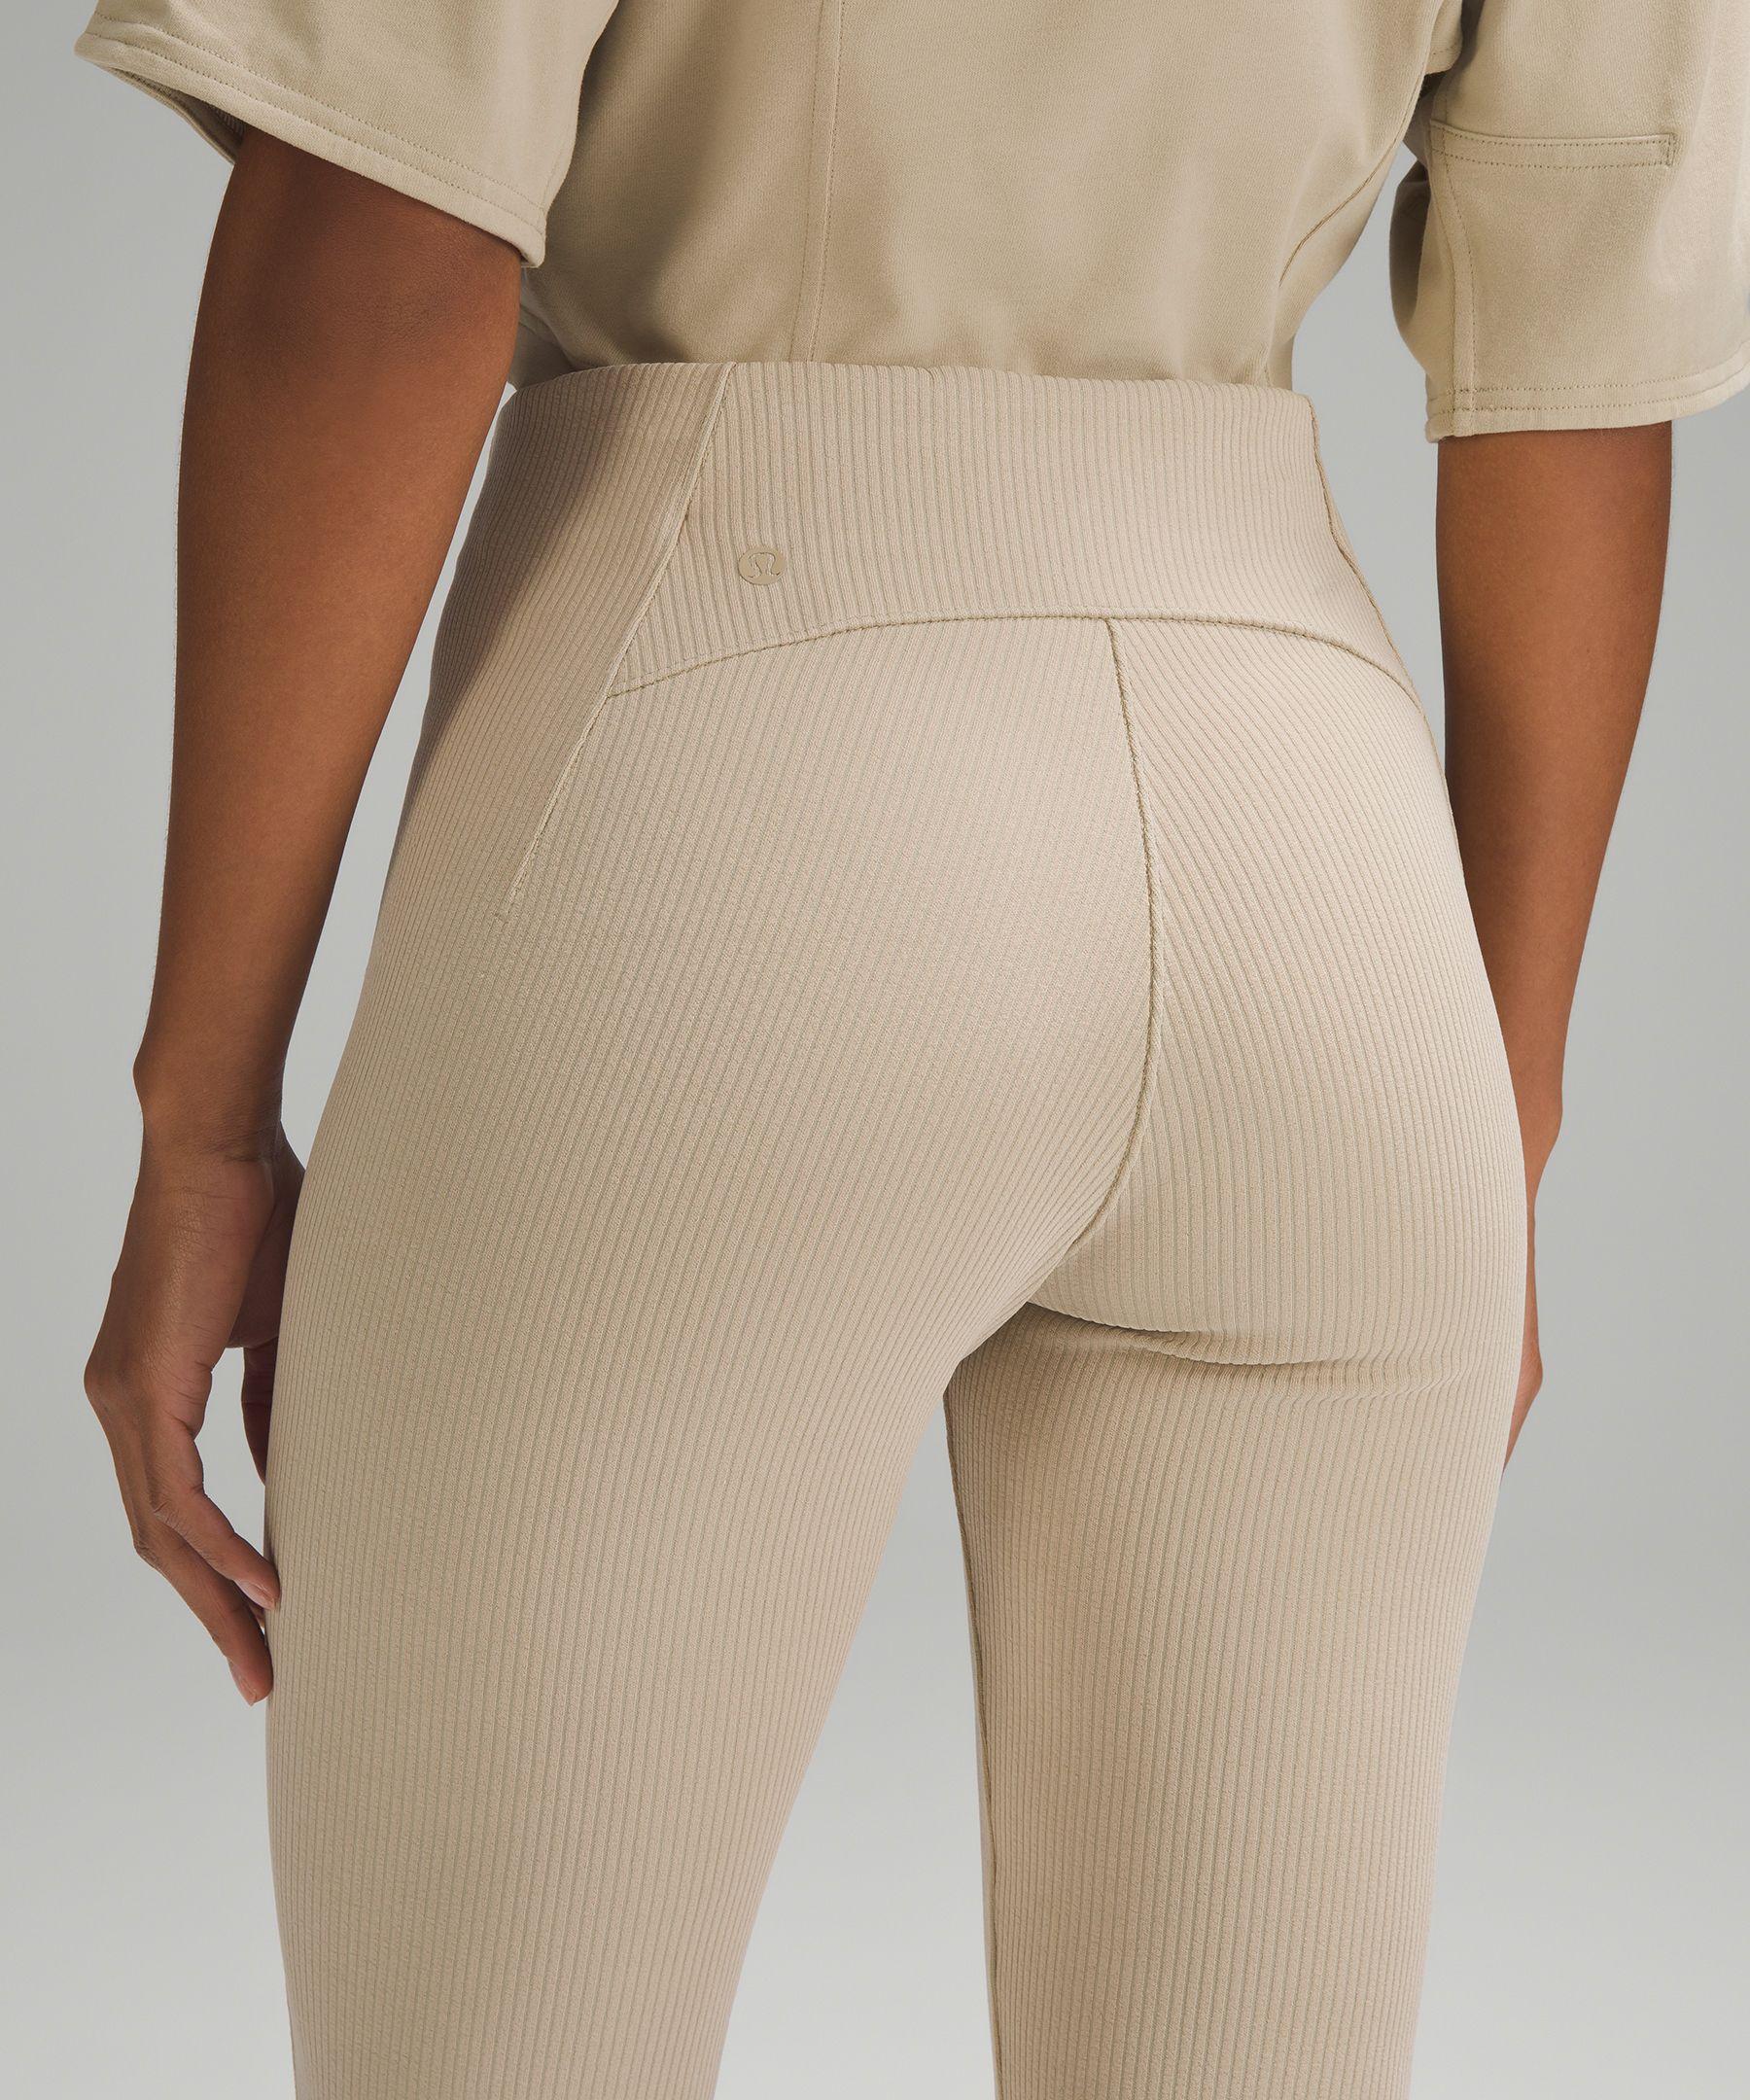 lululemon athletica Ribbed Softstreme Zip-leg High-rise Cropped Pants - 25  - Color Khaki - Size 0 in Natural